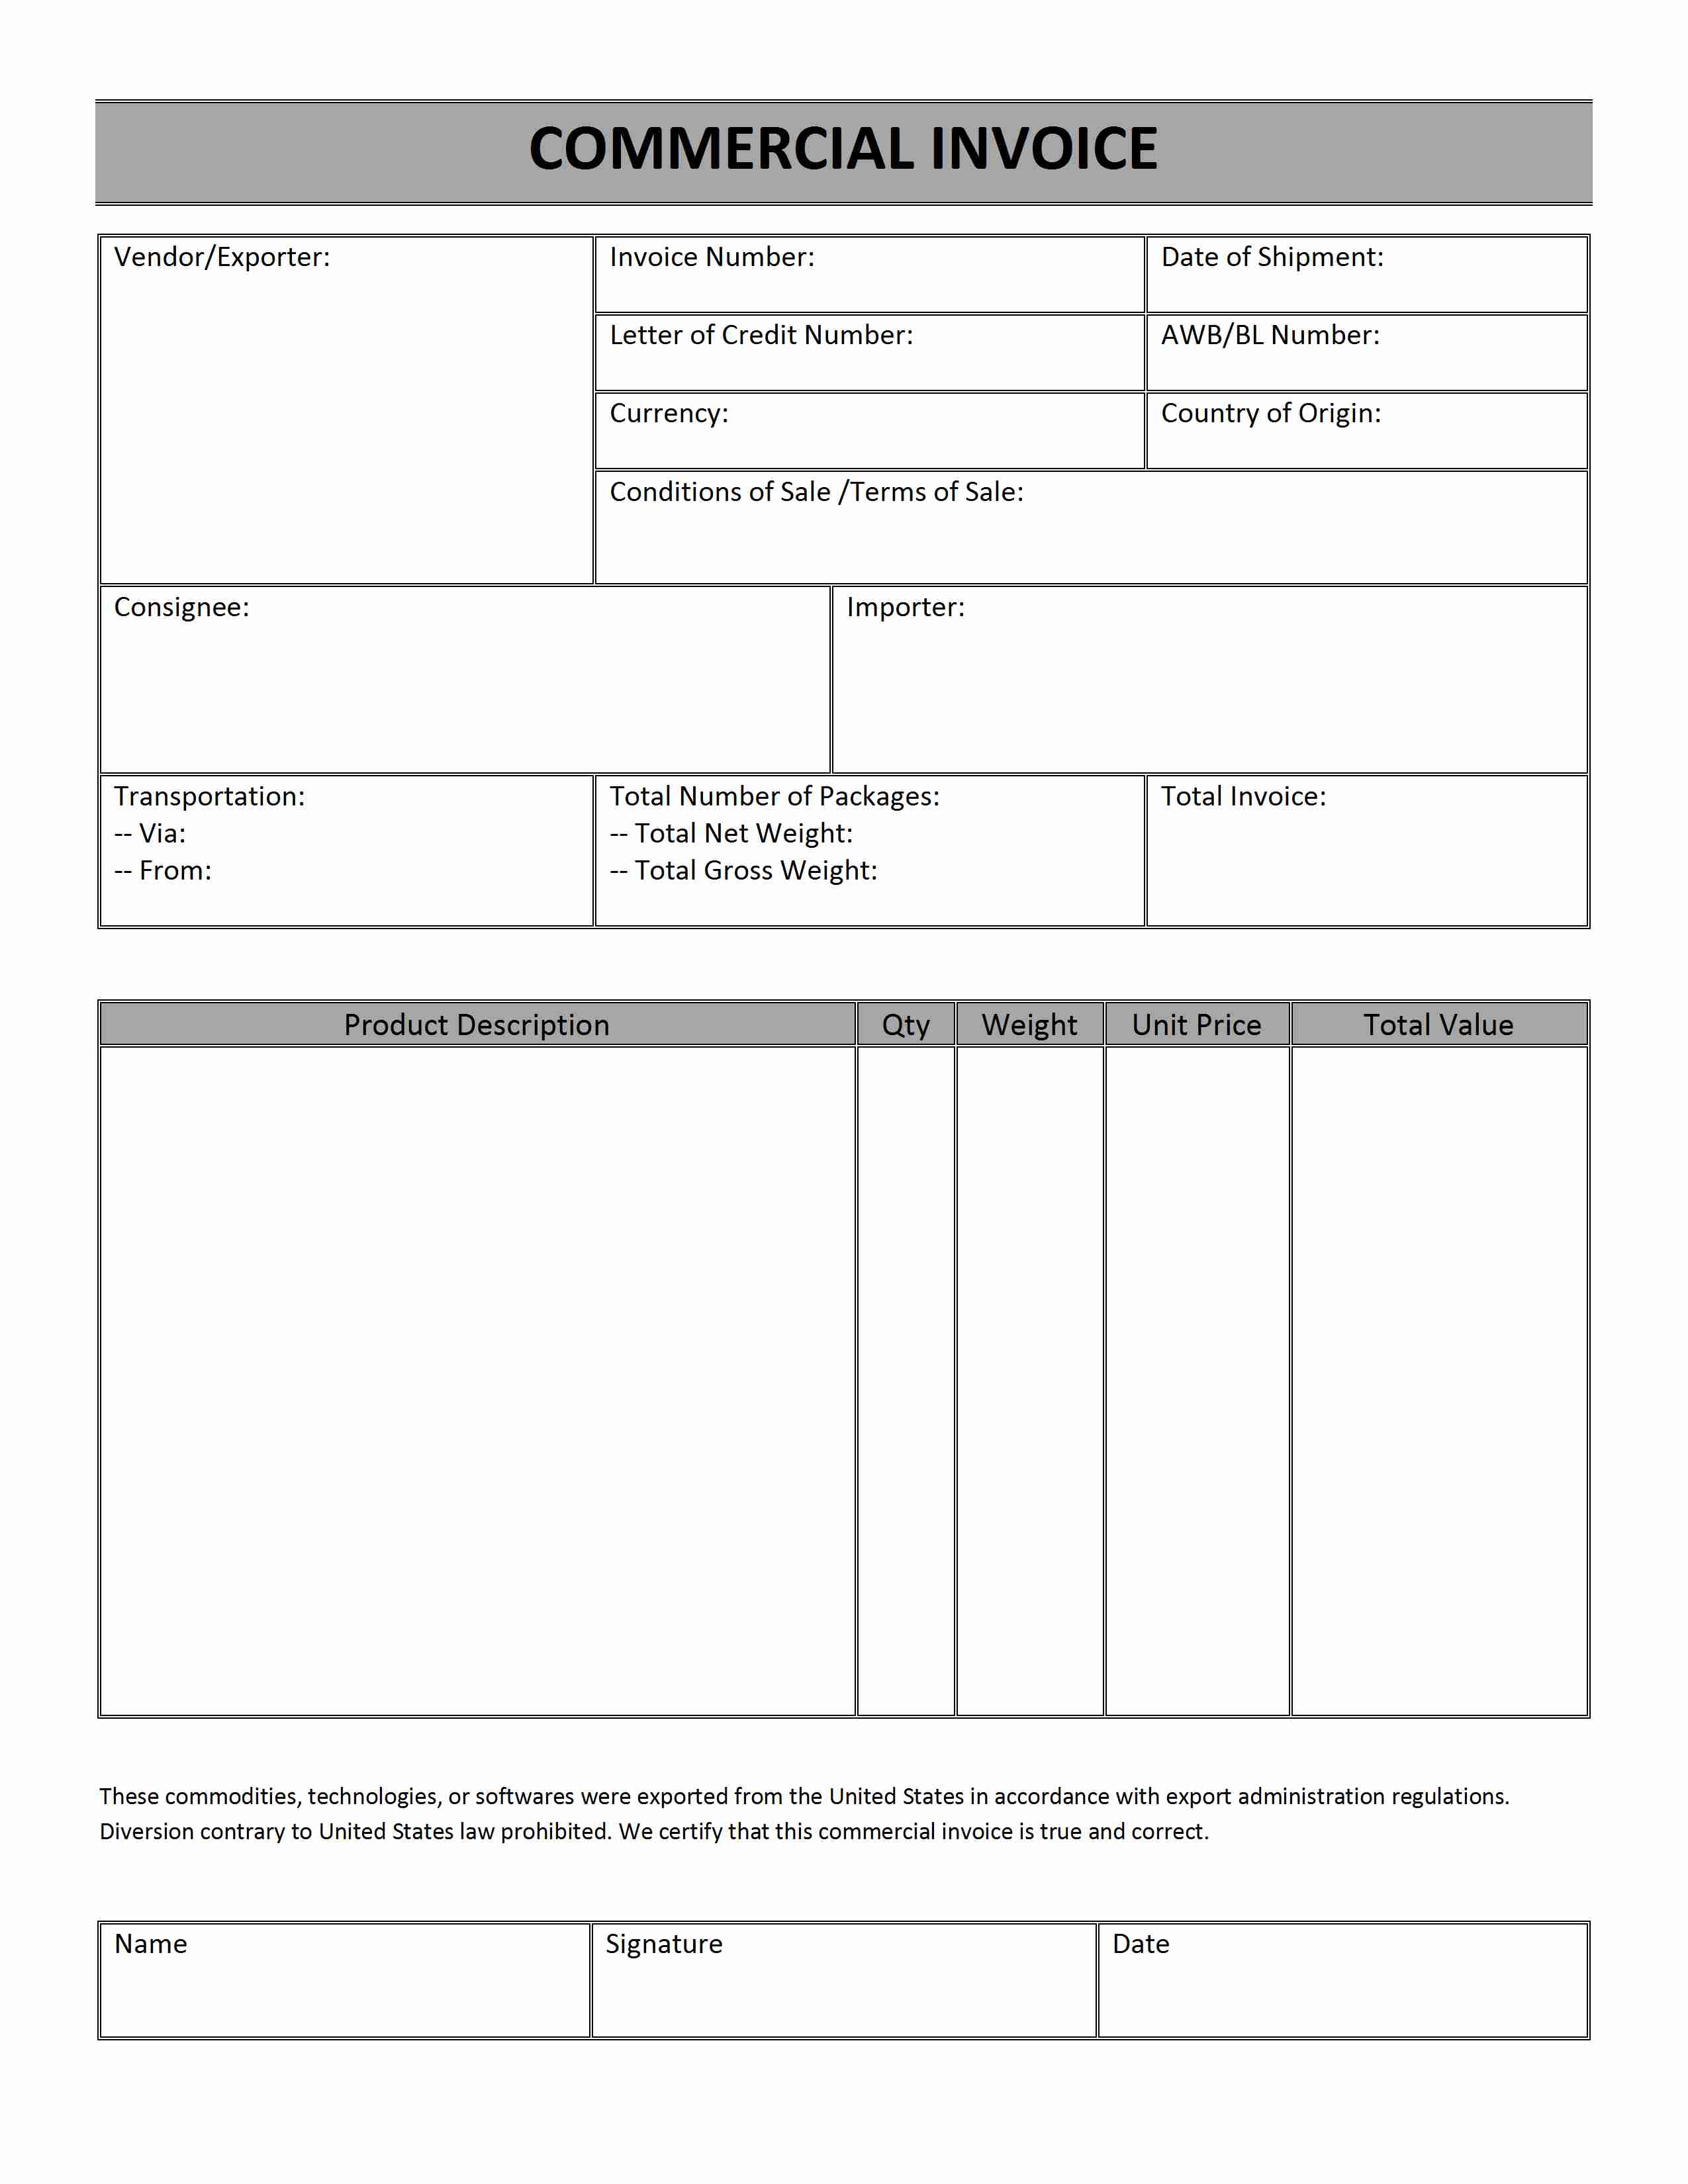 commercial invoice definition proforma invoice word templates free word templates ms word 2550 X 3300